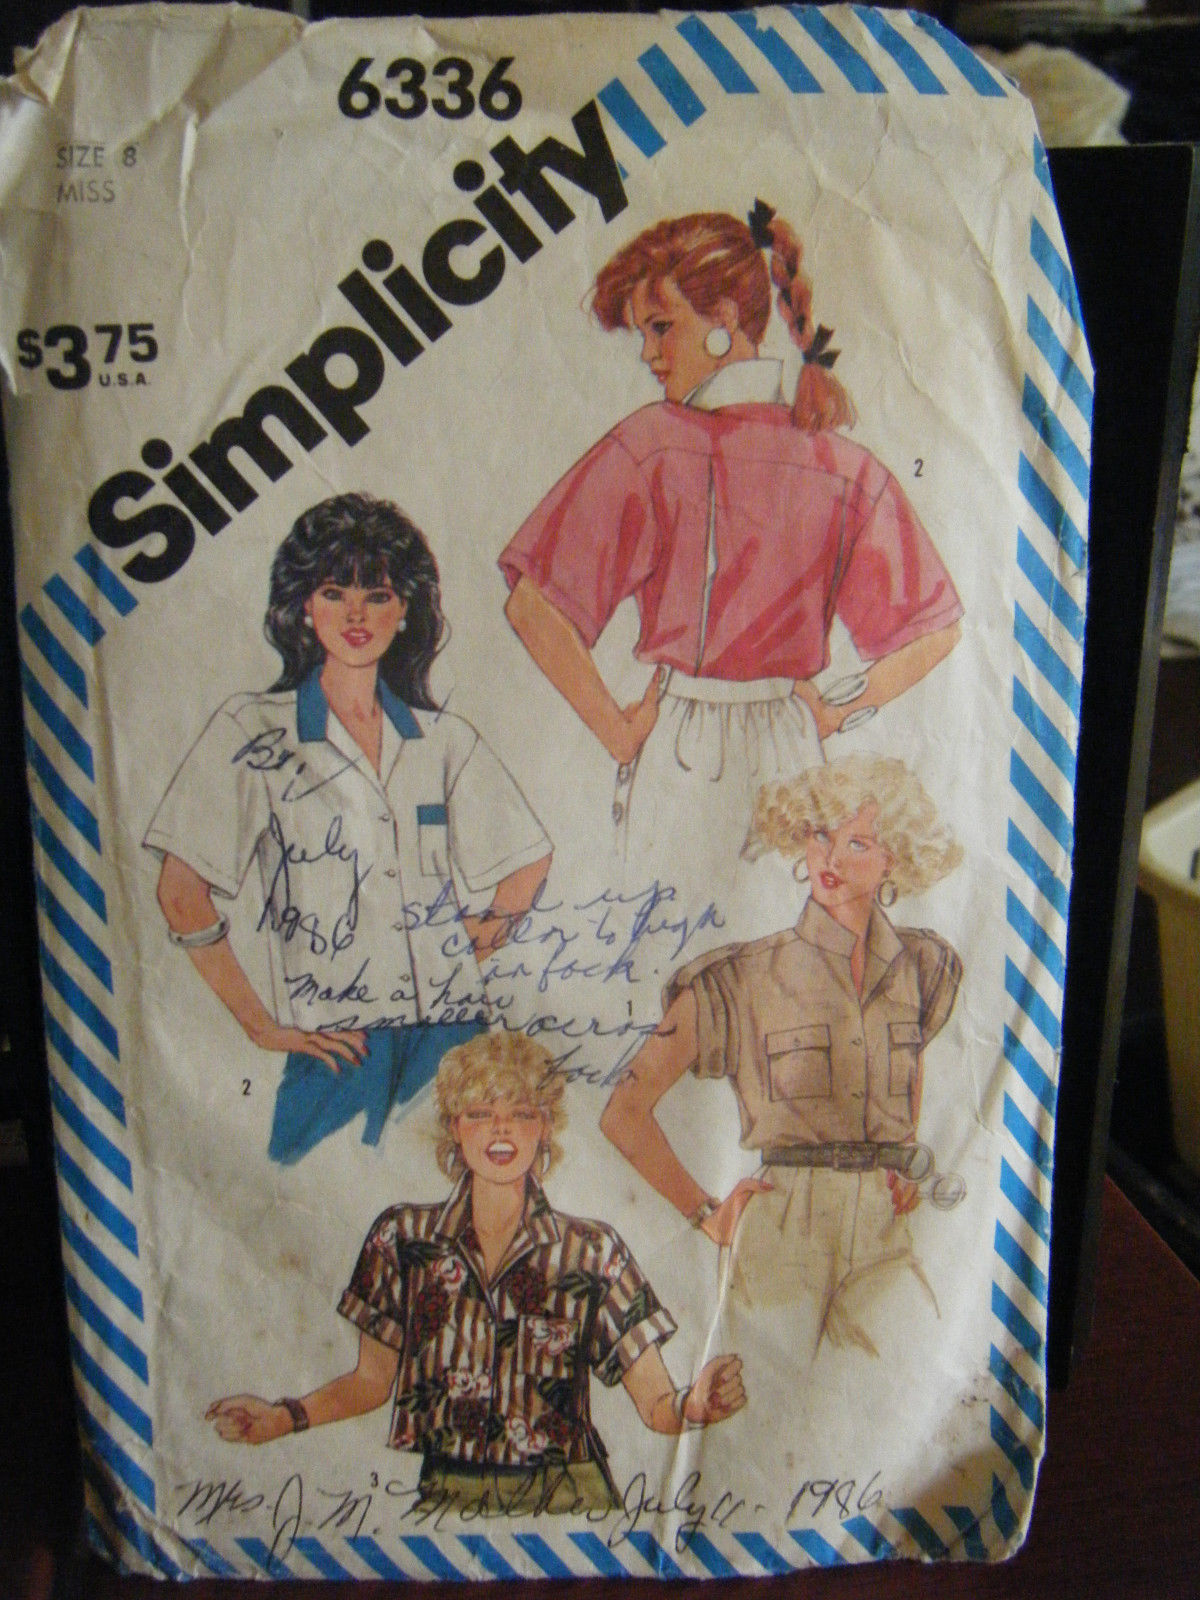 Vintage Simplicity 6336 Misses Variety of Shirts Pattern - Size 8 Bust 31 1/2 - $6.26